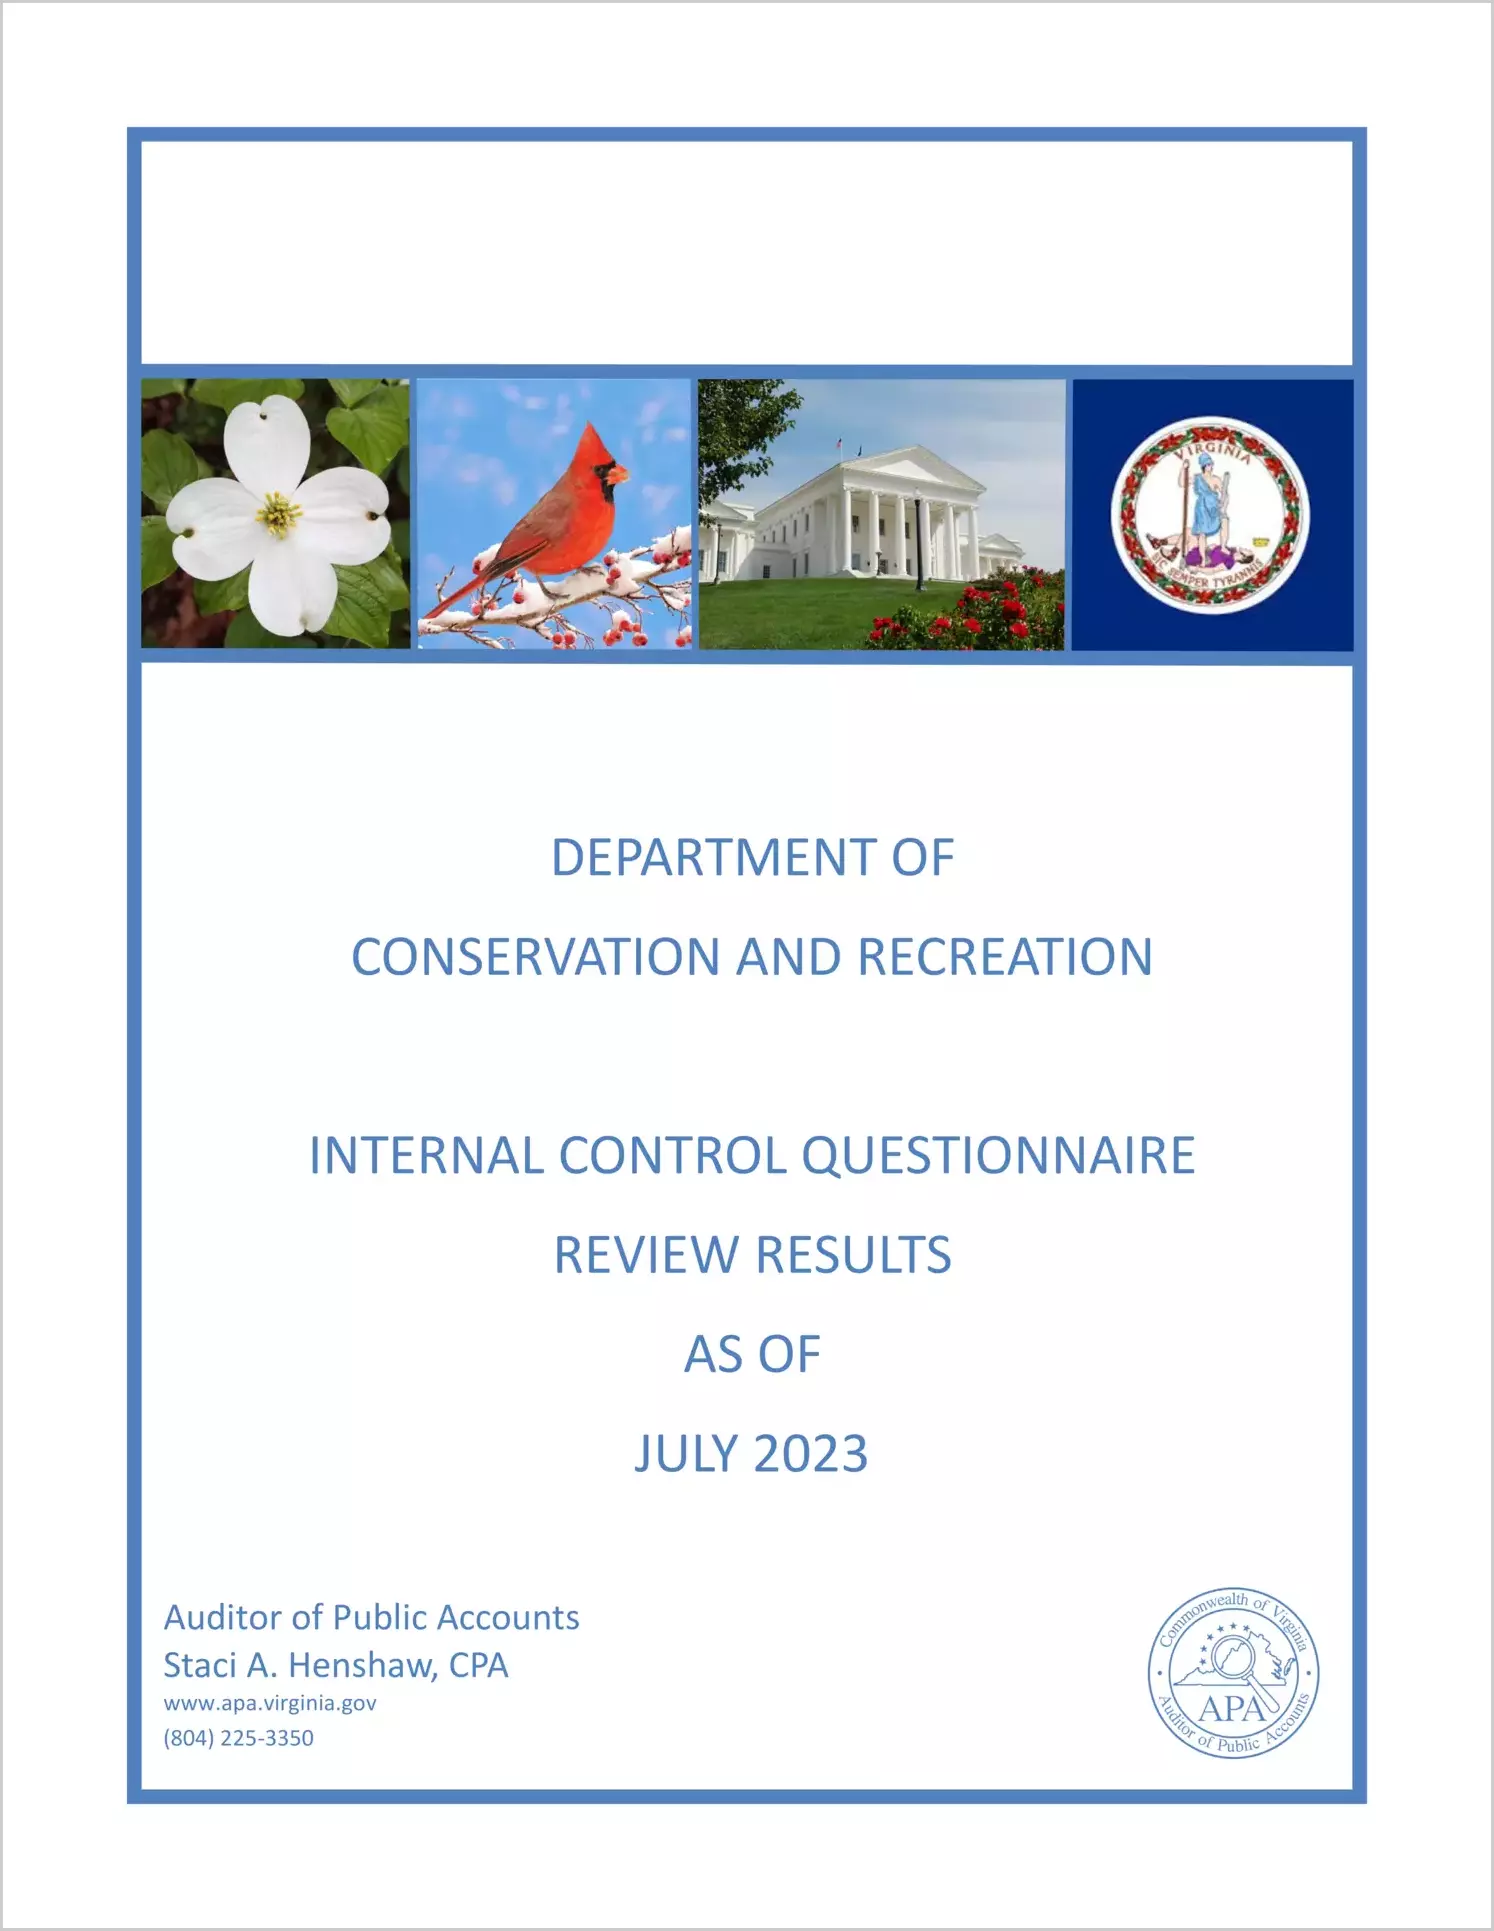 Department of Conservation and Recreation Internal Control Questionnaire Review Results as of July 2023